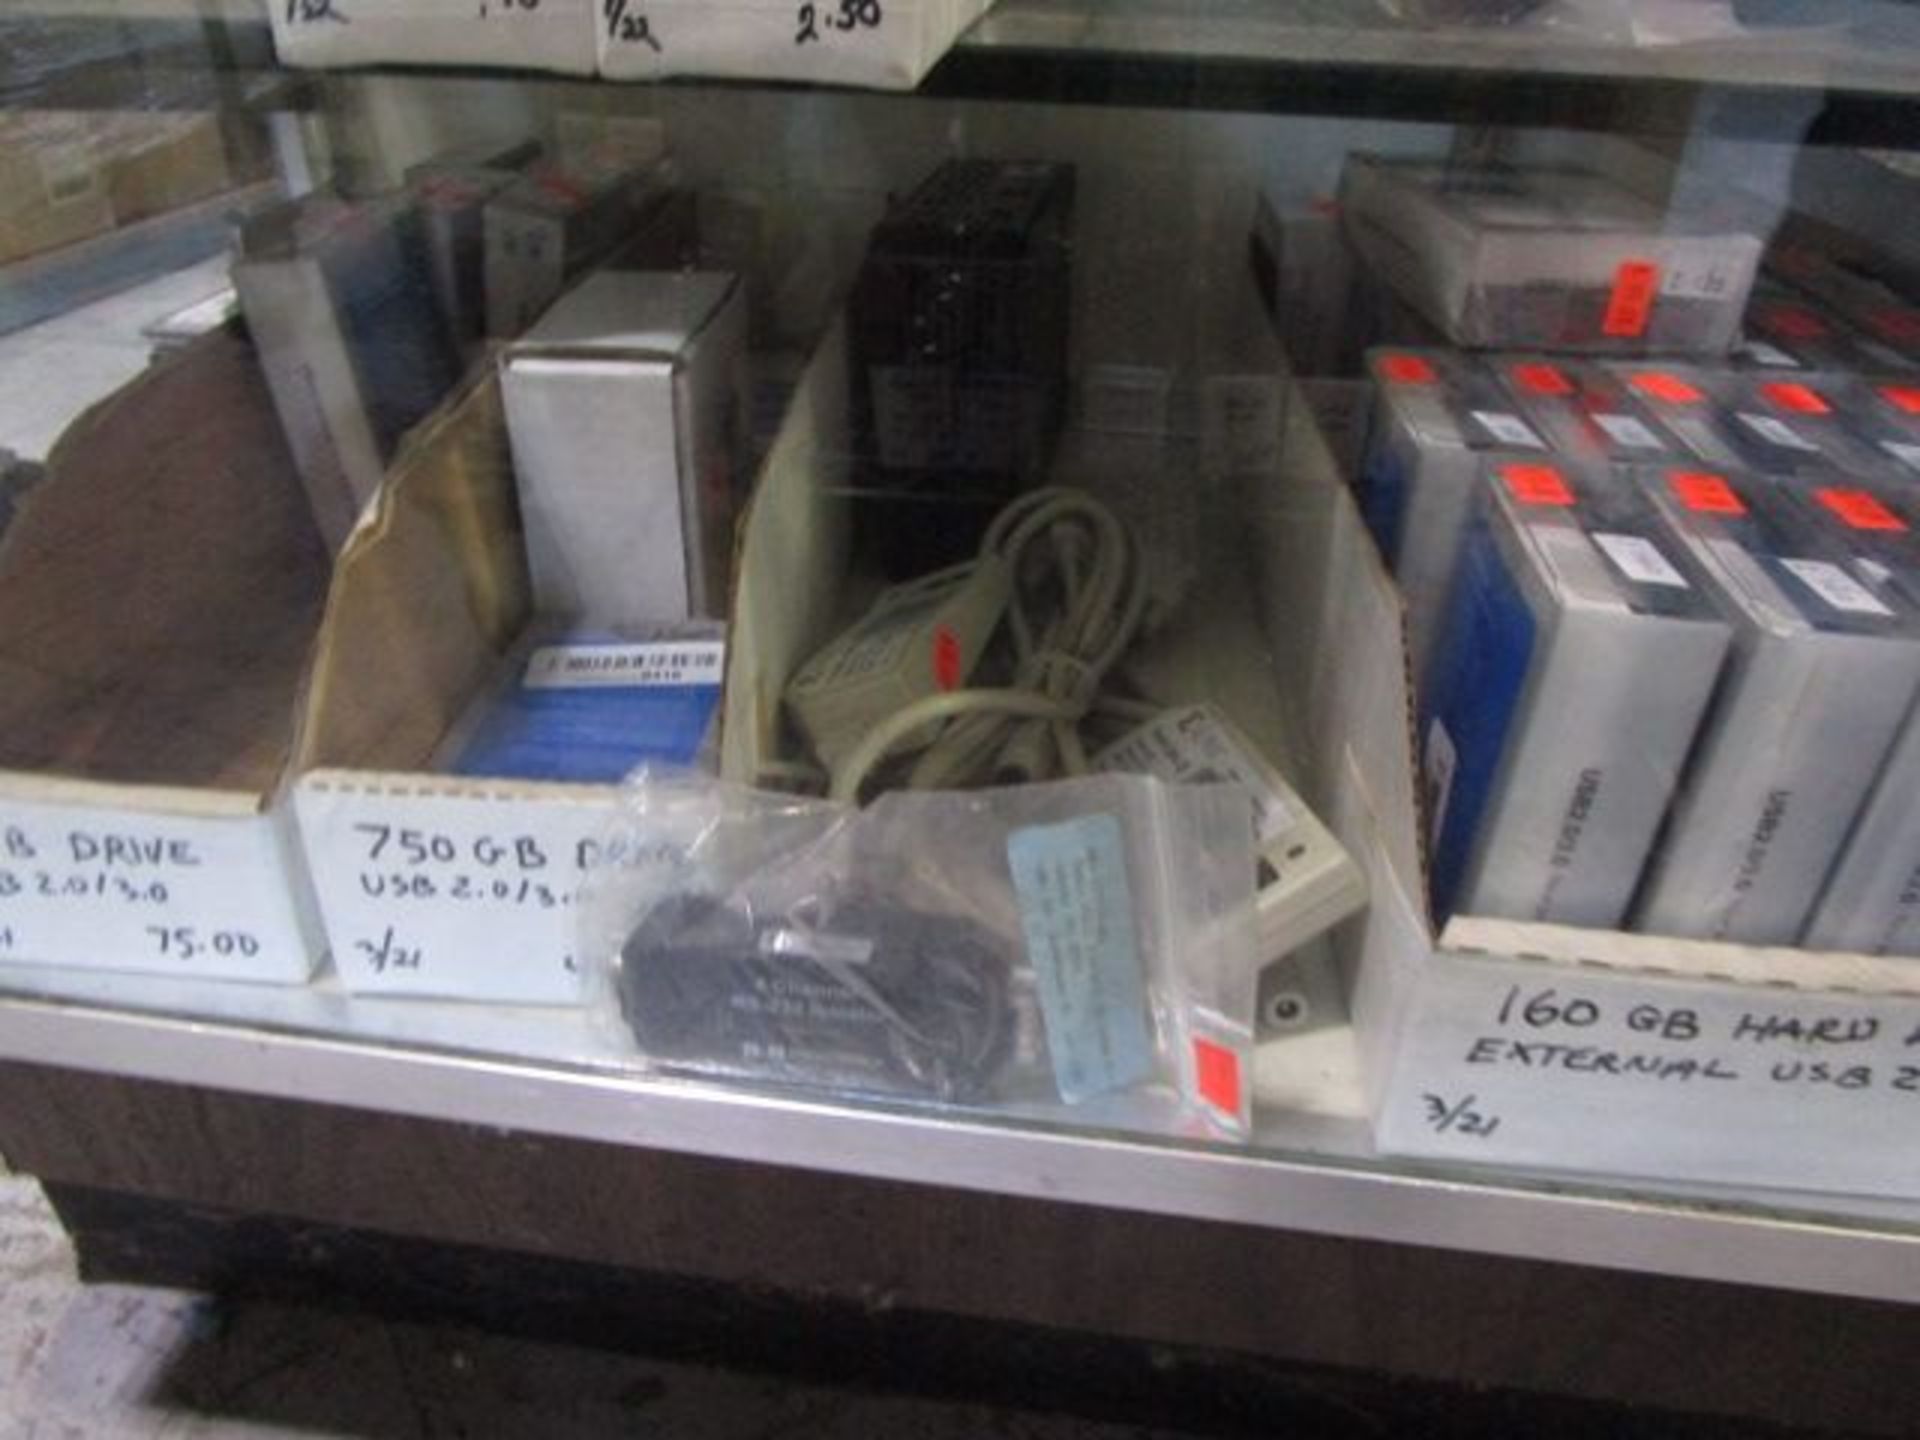 SHELVING UNIT OF THYRISTOR, POWER MODULE DIODES, VACUUM CAPS, GB HARD DRIVES - Image 11 of 12